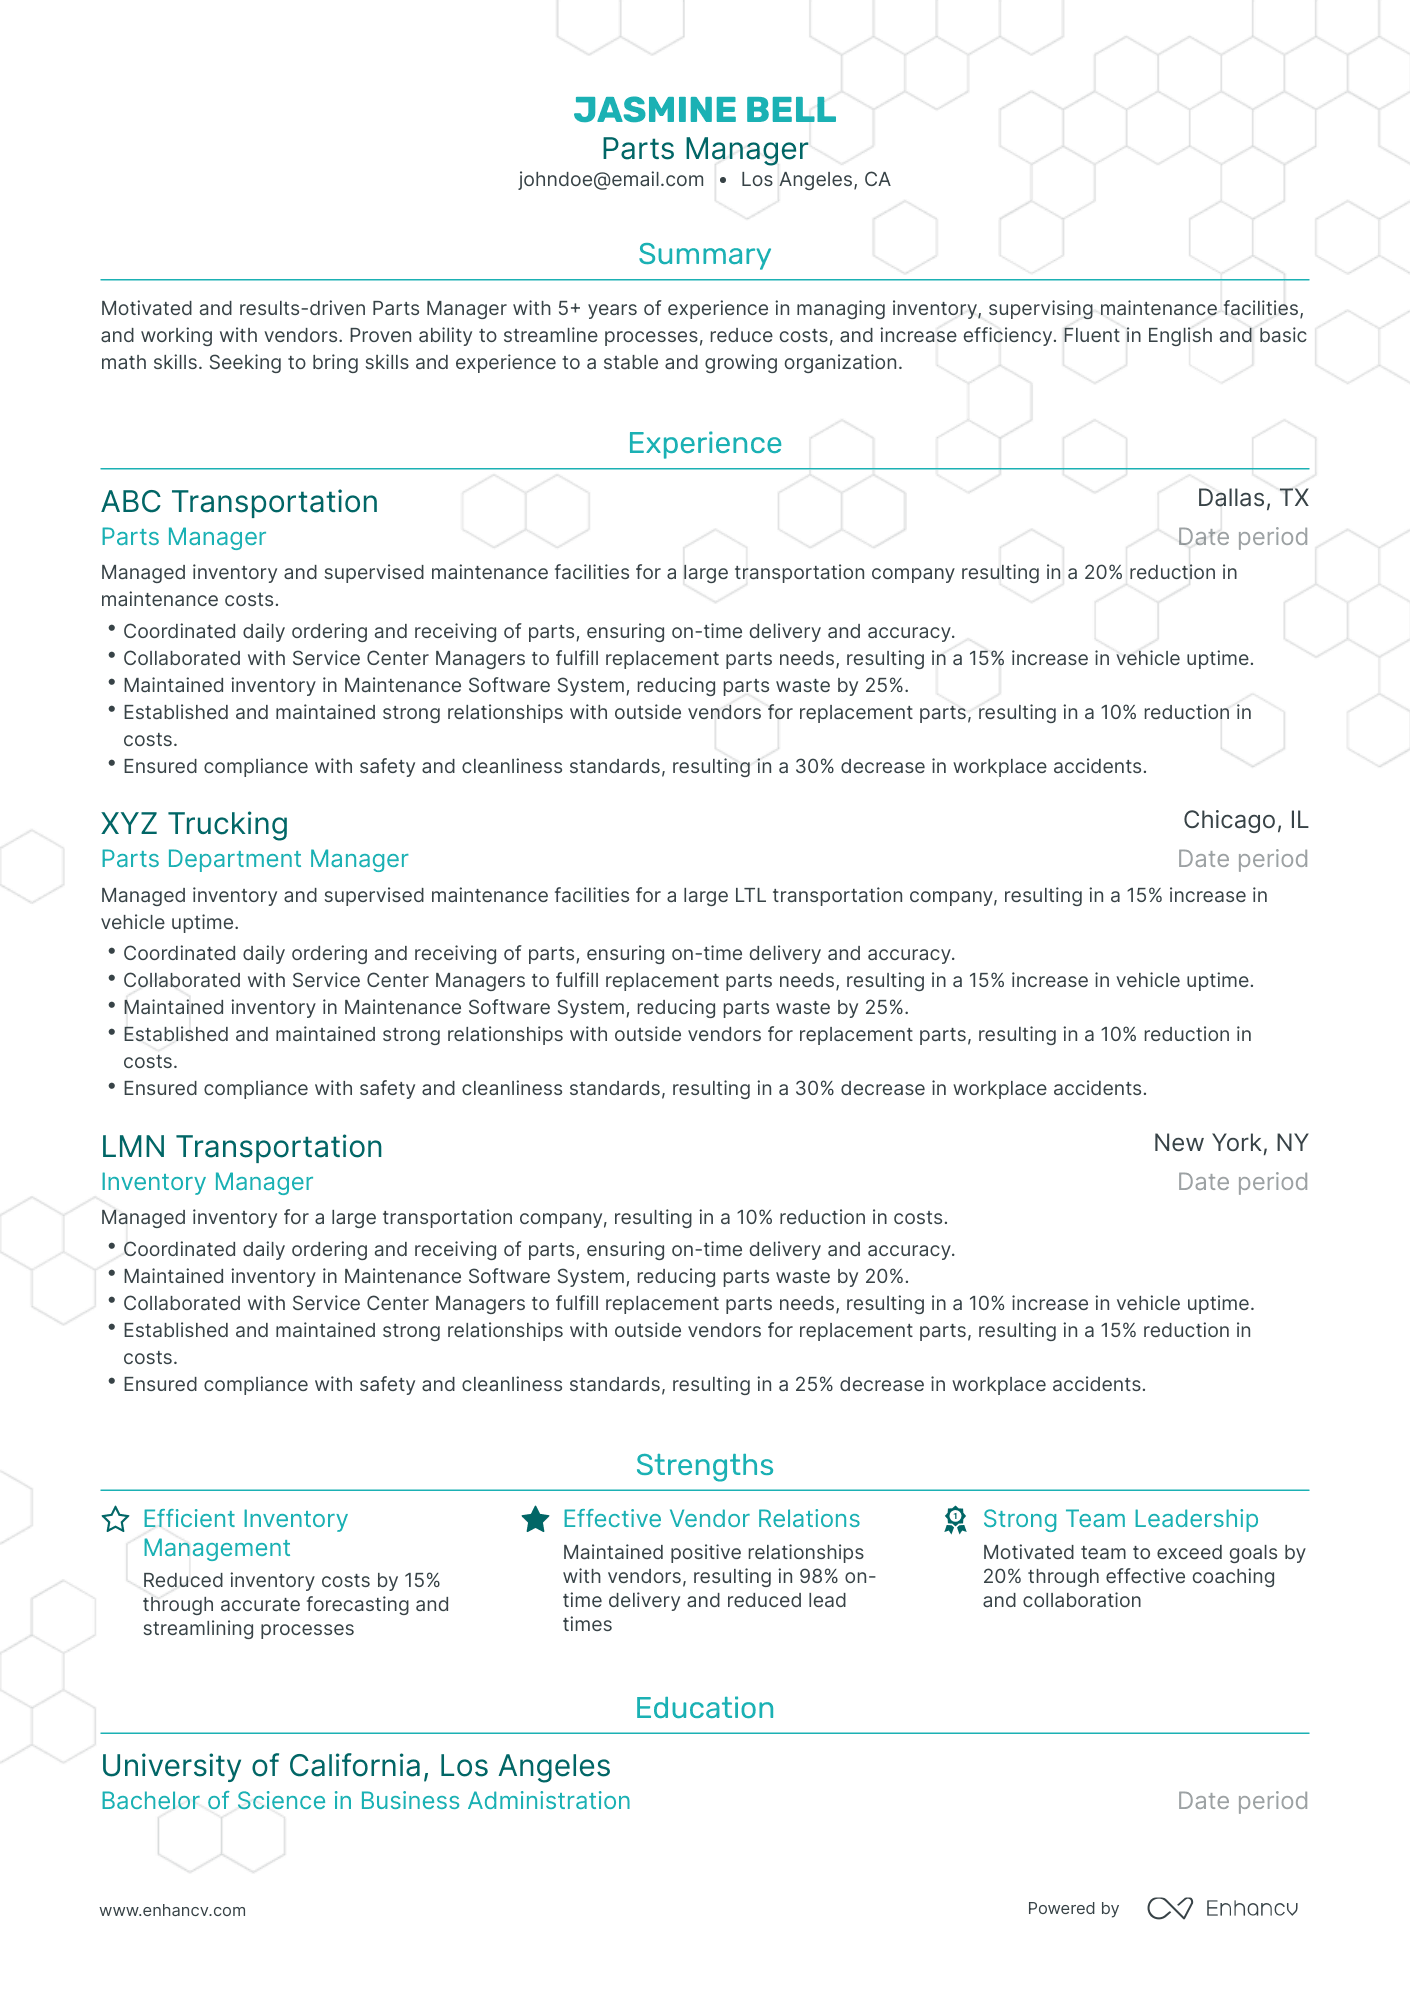 Traditional Parts Manager Resume Template